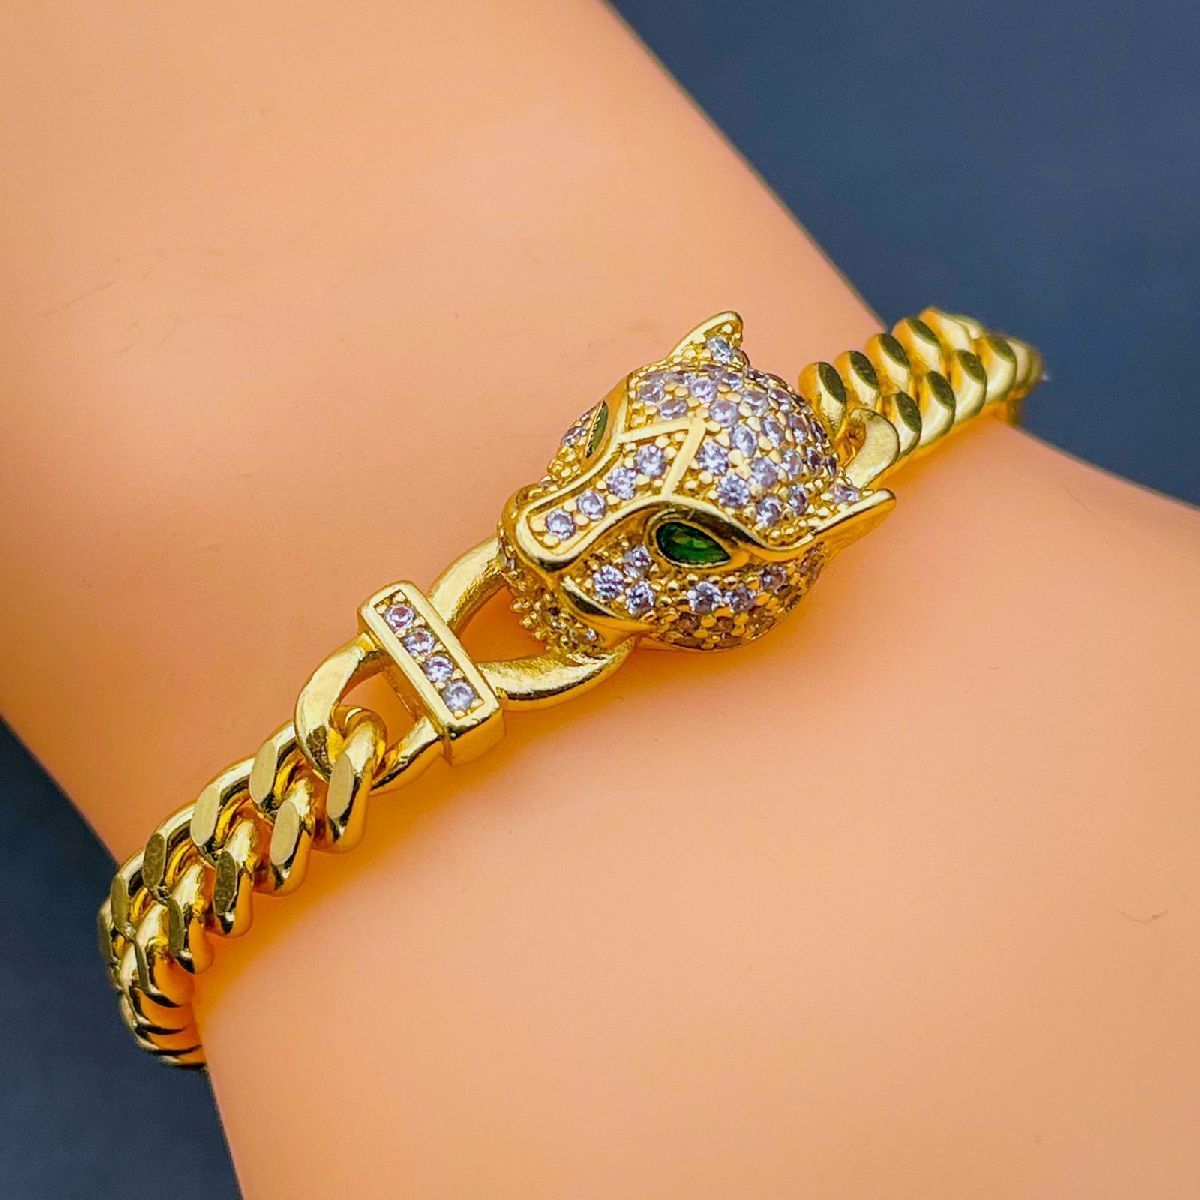 BACK IN STOCK! 18K Gold Filled Solid Tiger Face Power Symbol Hinged Cuff  Bangle | eBay